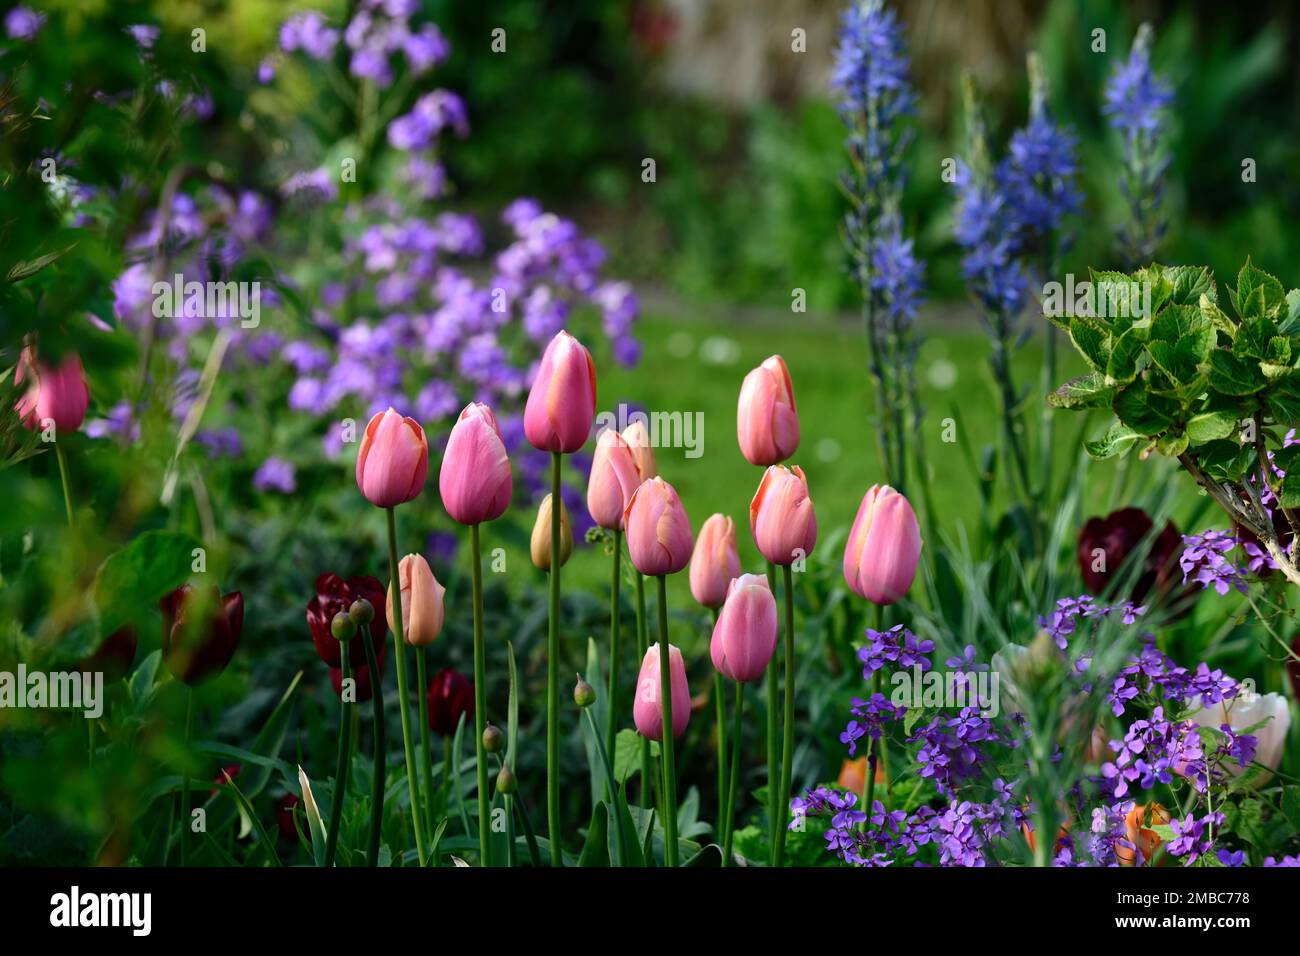 tulip salmon impression,tulipa salmon impression,salmon-apricot flowers,darwin hybrid,camassia and tulips,blue and pink tulips,spring in the garden,RM Stock Photo